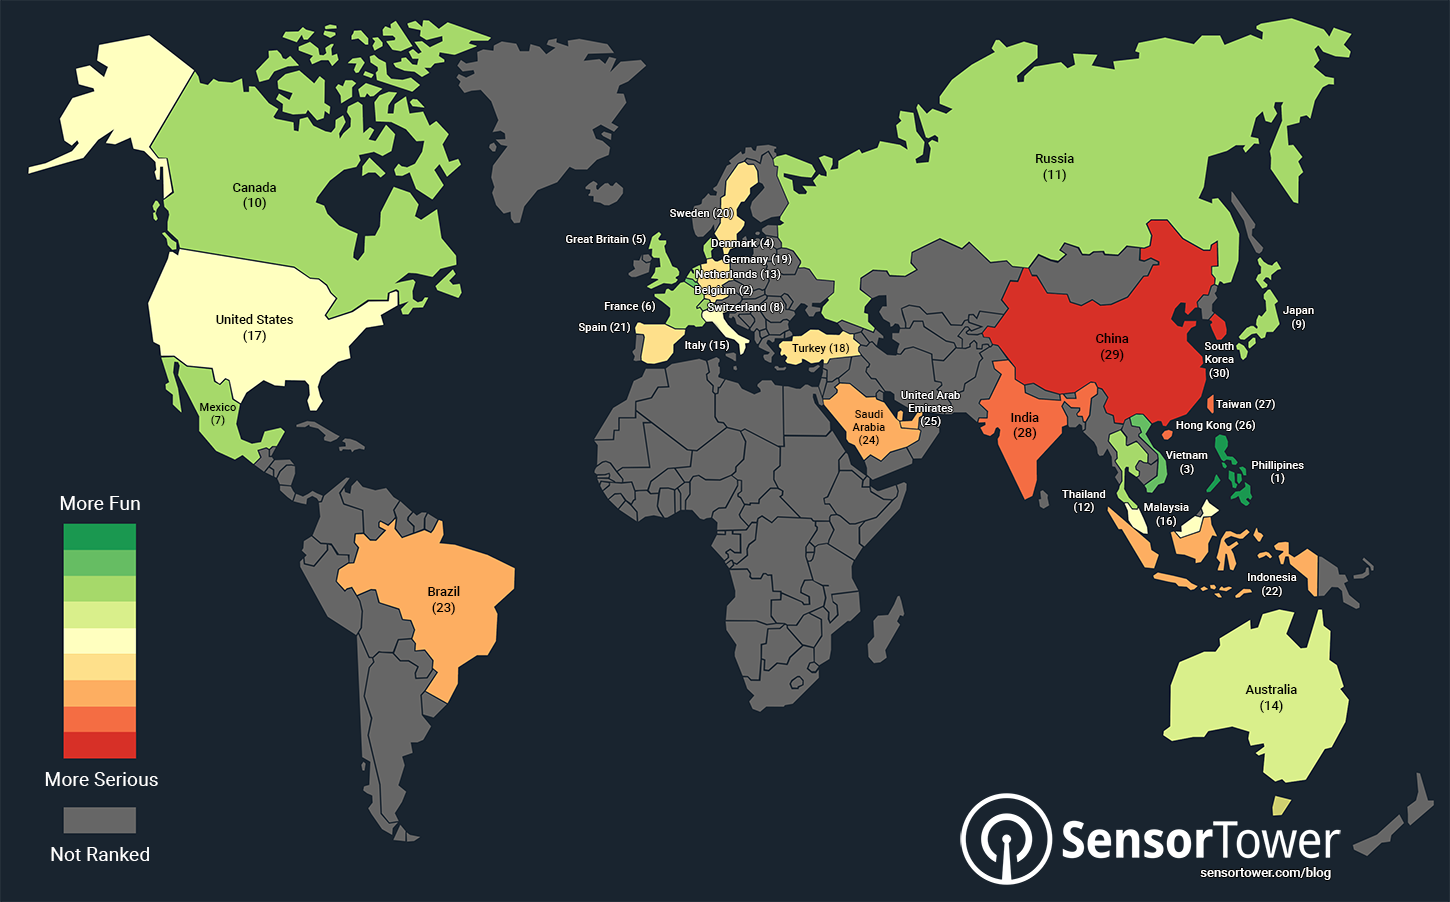 World Heat Map Based on Fun to Serious App Download Ratios